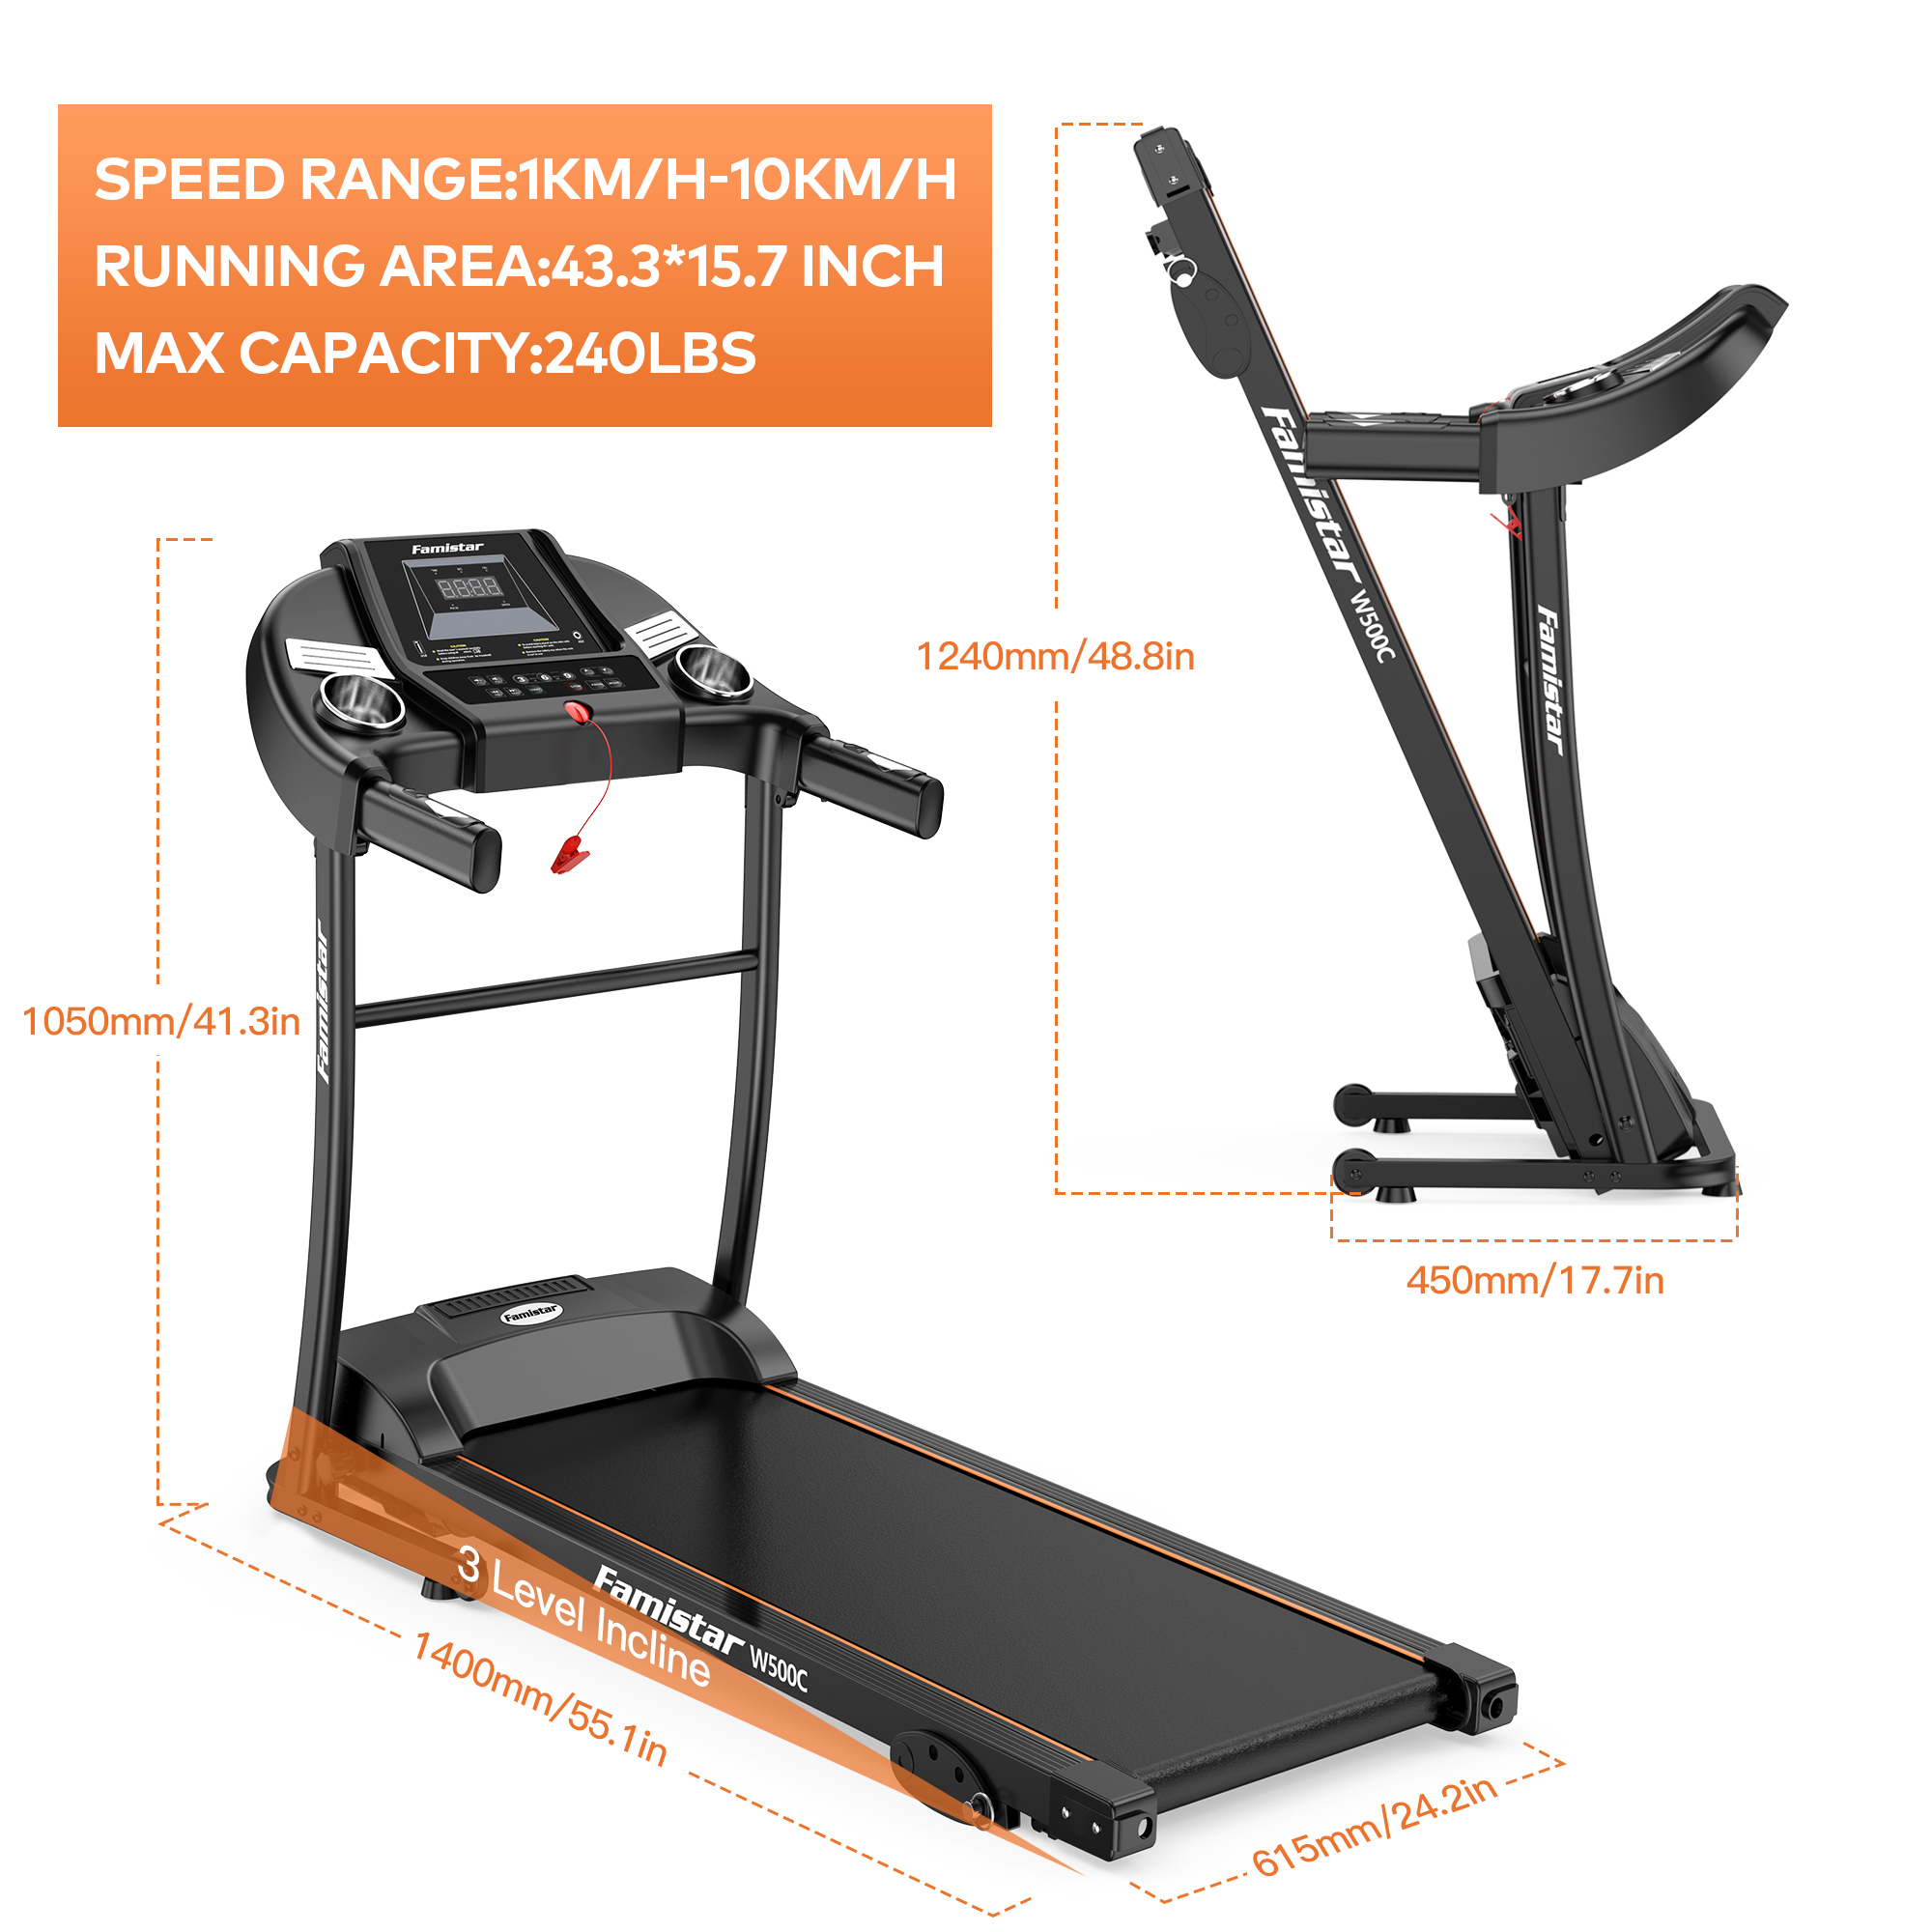 Famistar W500C 1.5HP Folding Electric Treadmill with 3 Level Manual Incline, Max 240LBS - image 5 of 11